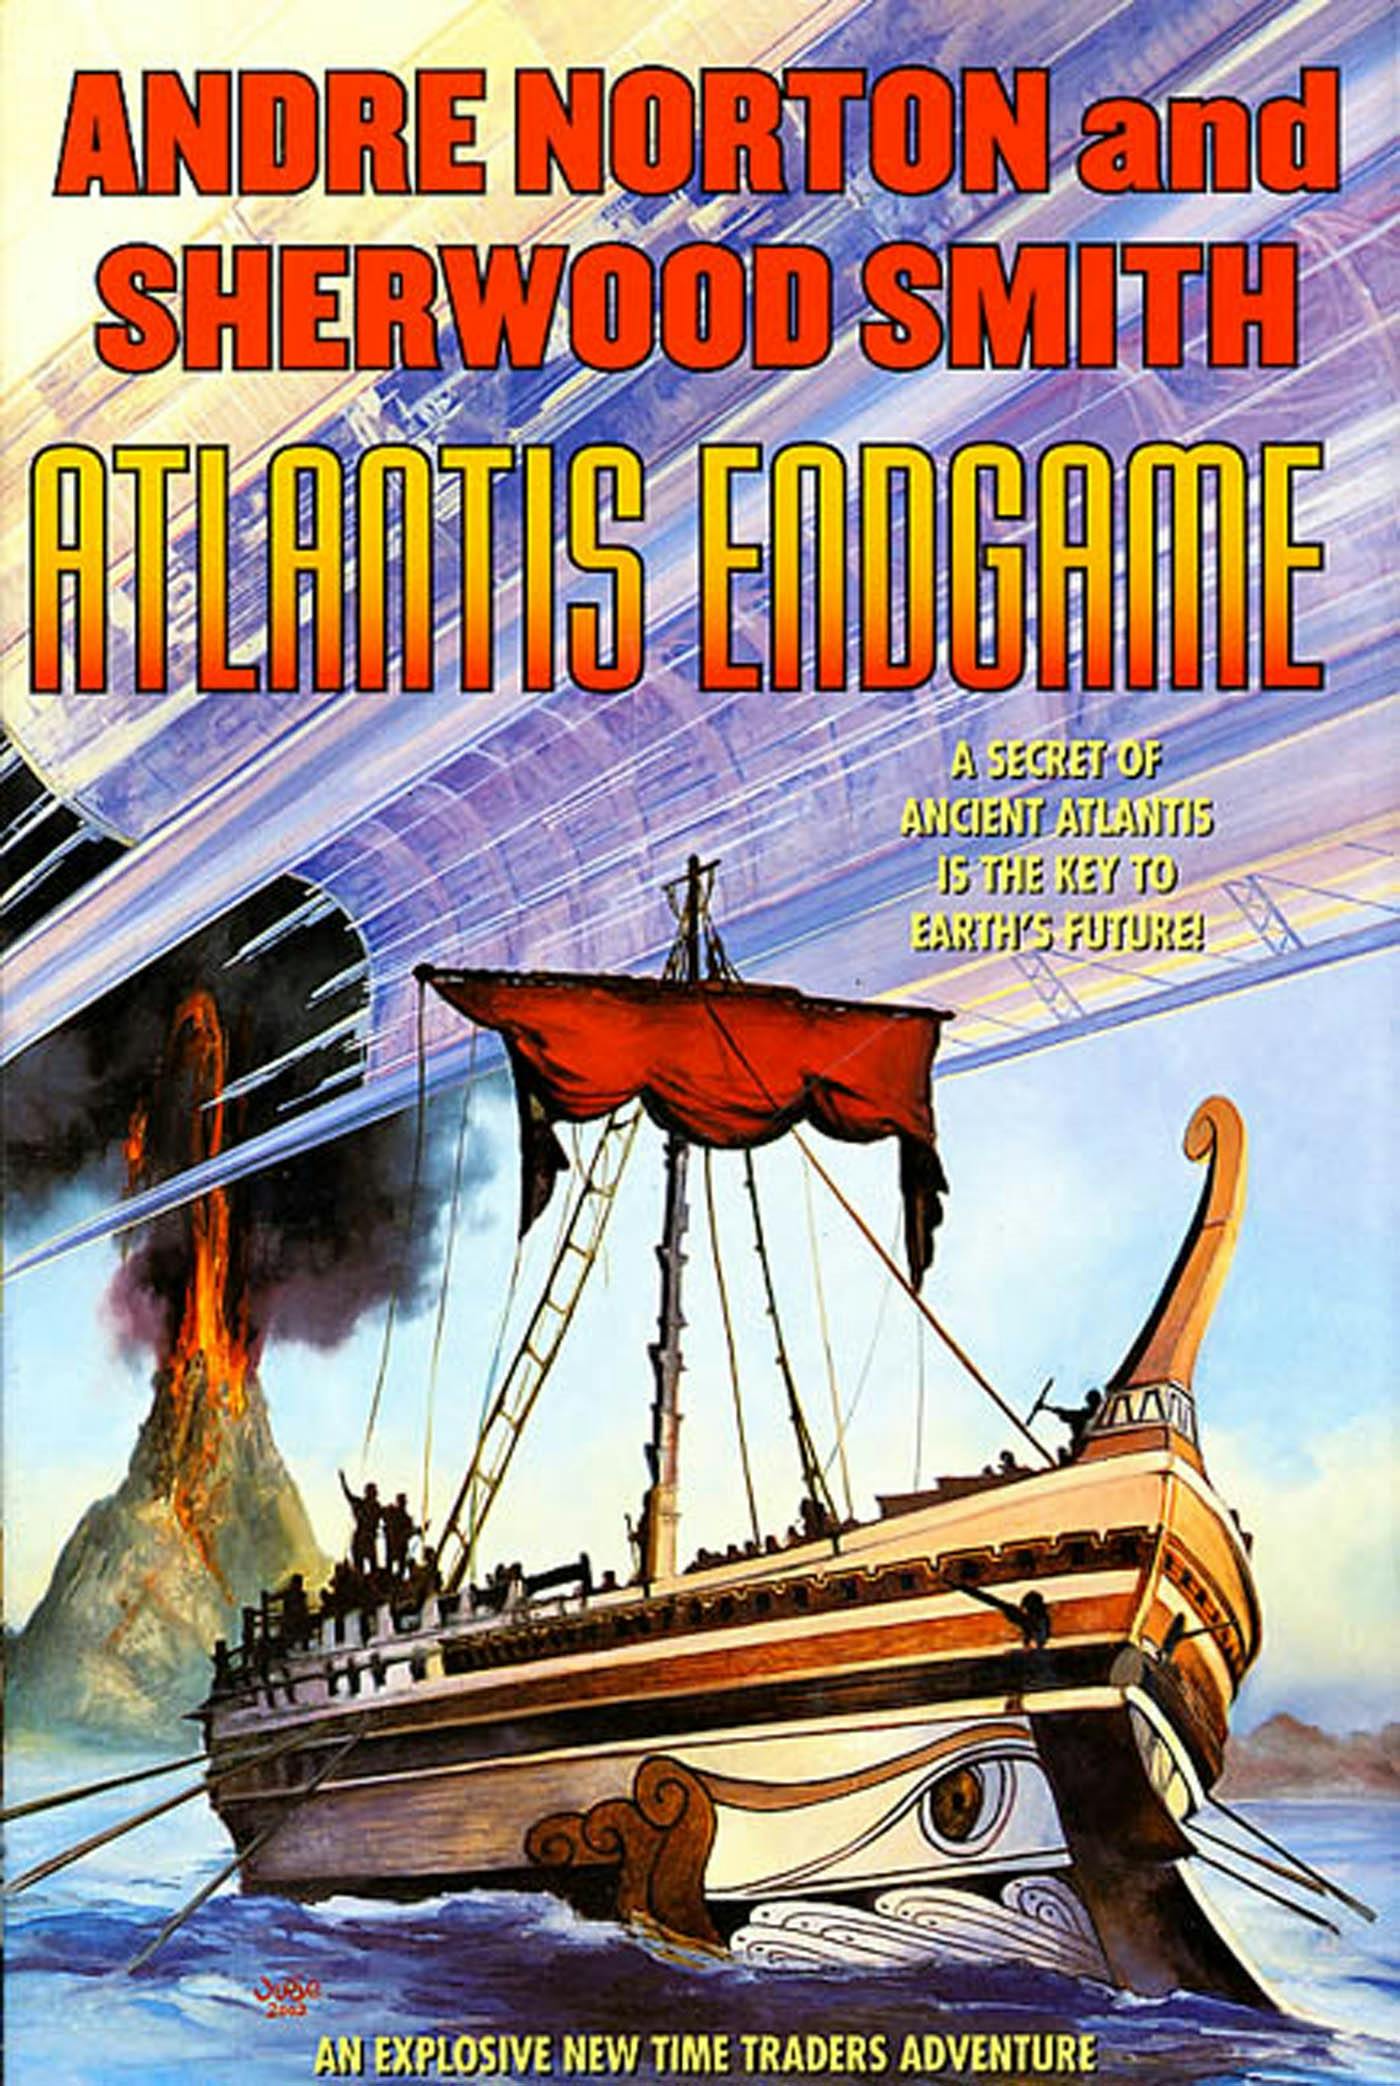 Cover for the book titled as: Atlantis Endgame